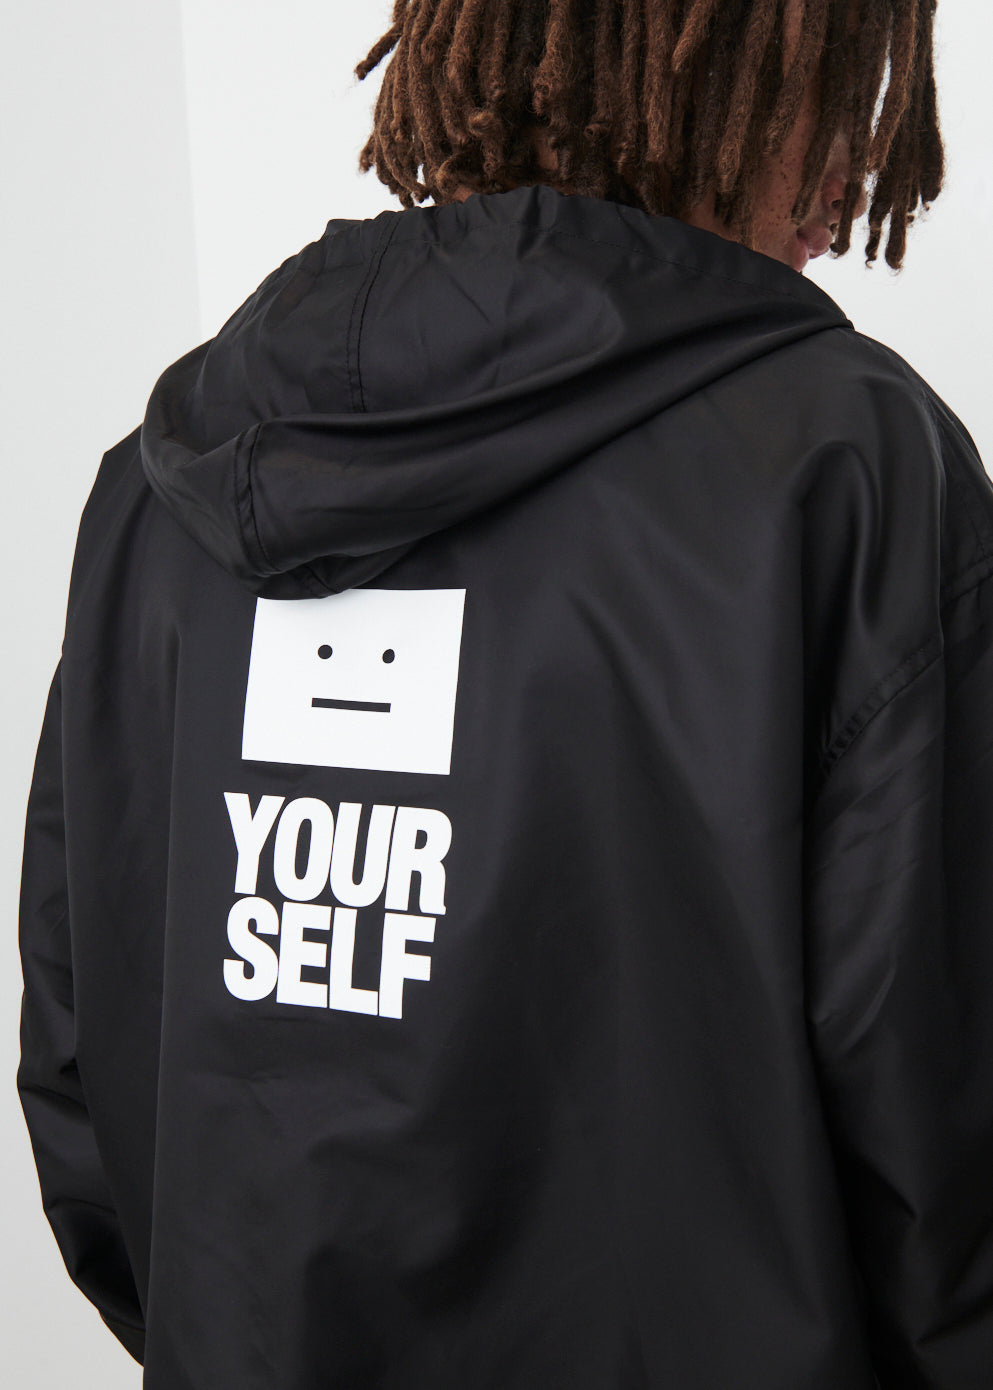 Opito Face Yourself Jacket